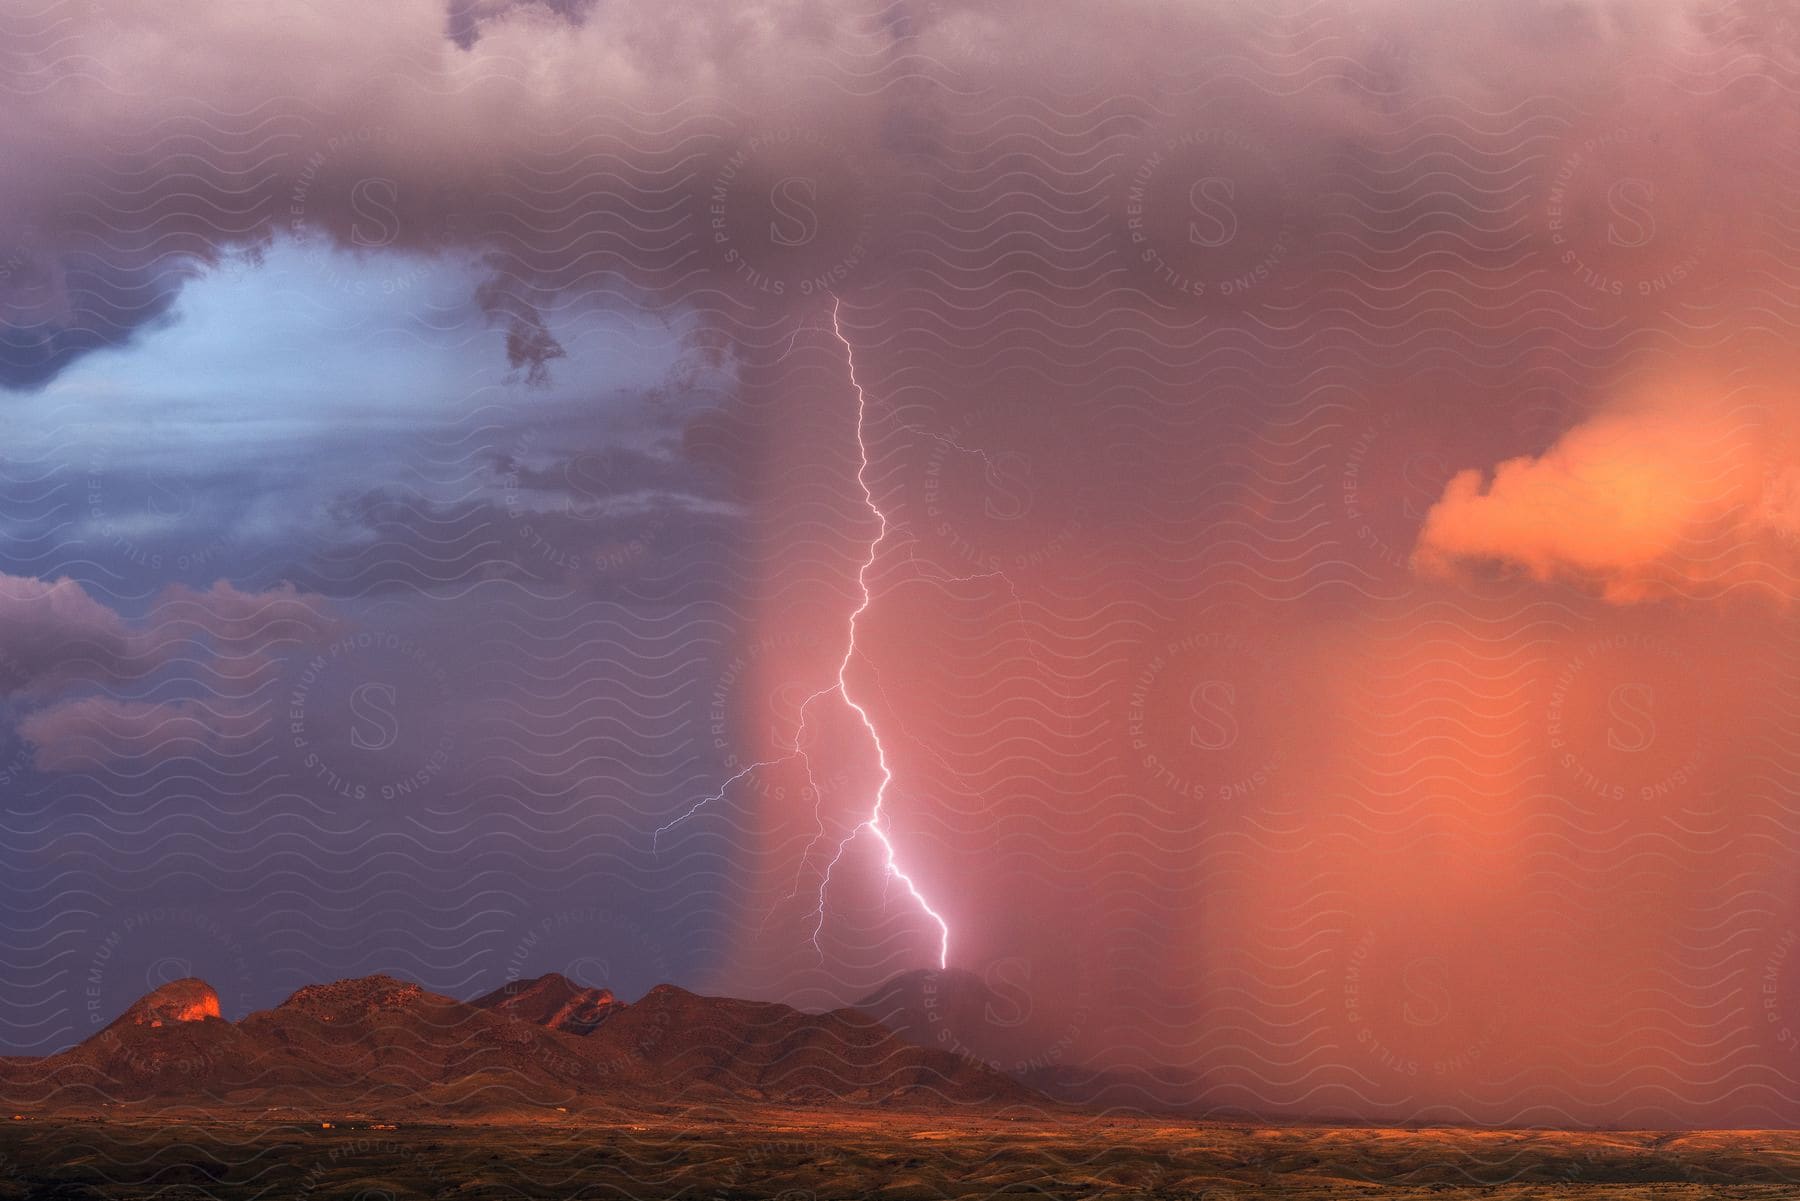 A sunset storm over the mustang mountains in southern arizona